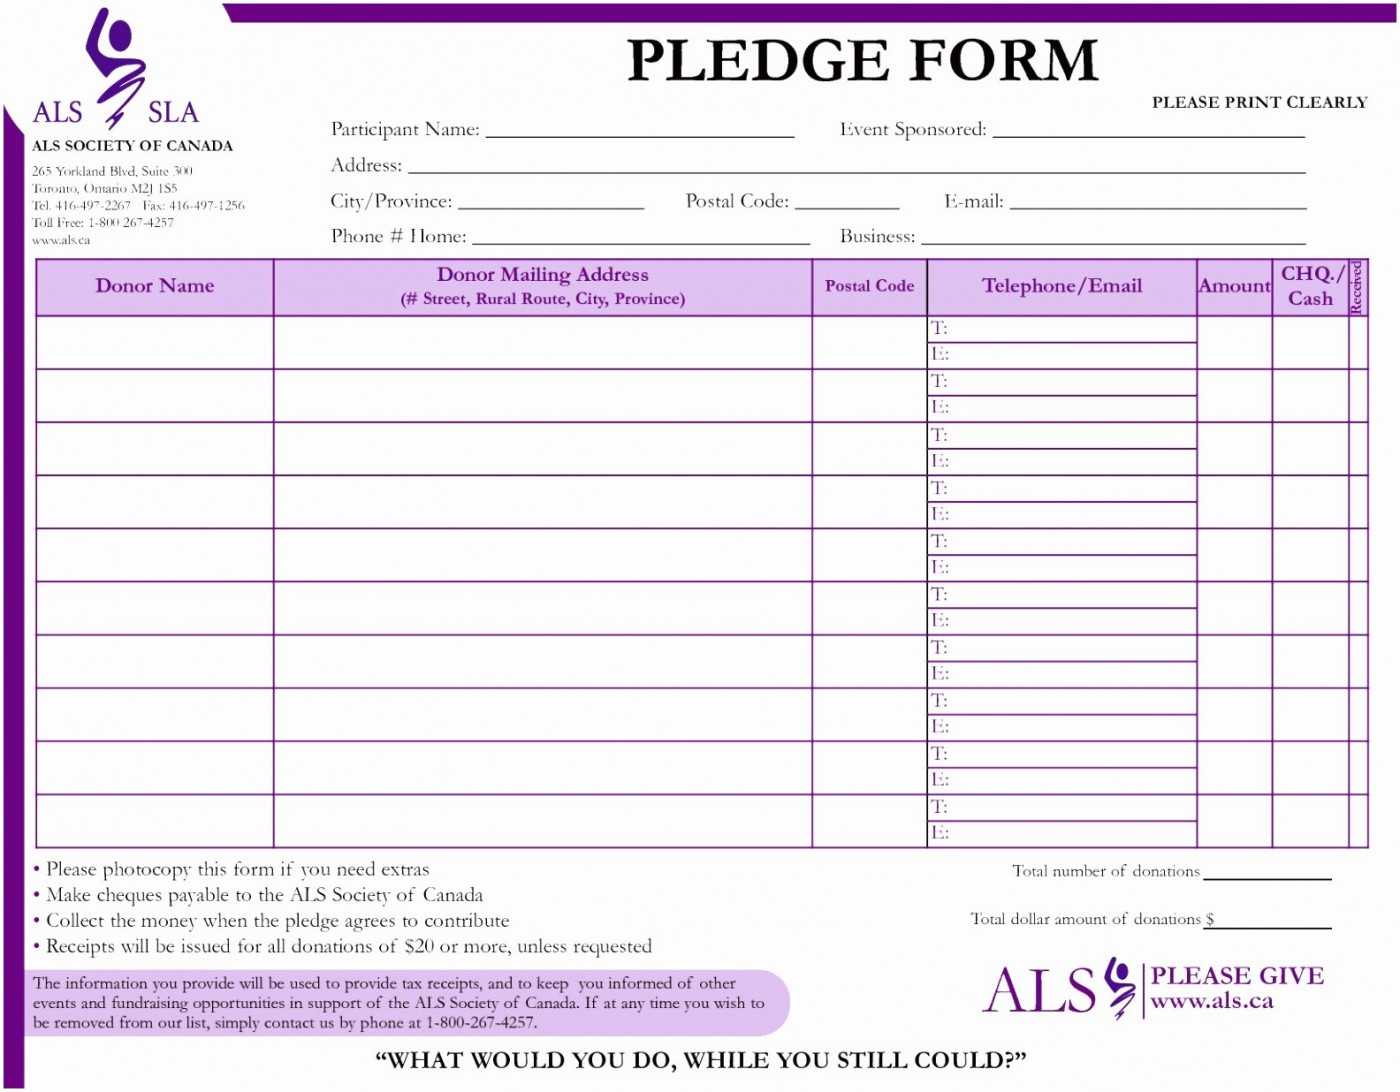 039 Pledge Card Template Word Best Of Fundraiser Form Pttyt Intended For Church Pledge Card Template